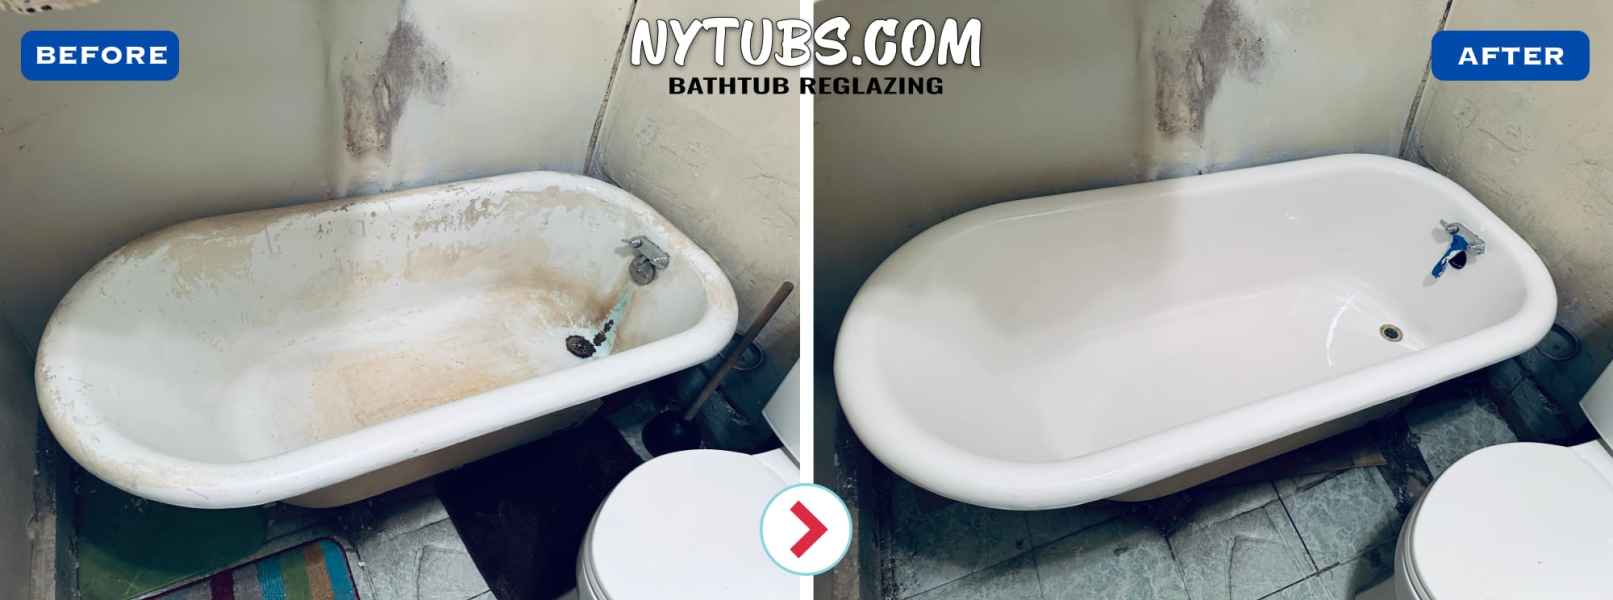 Bathtub restoration before and after